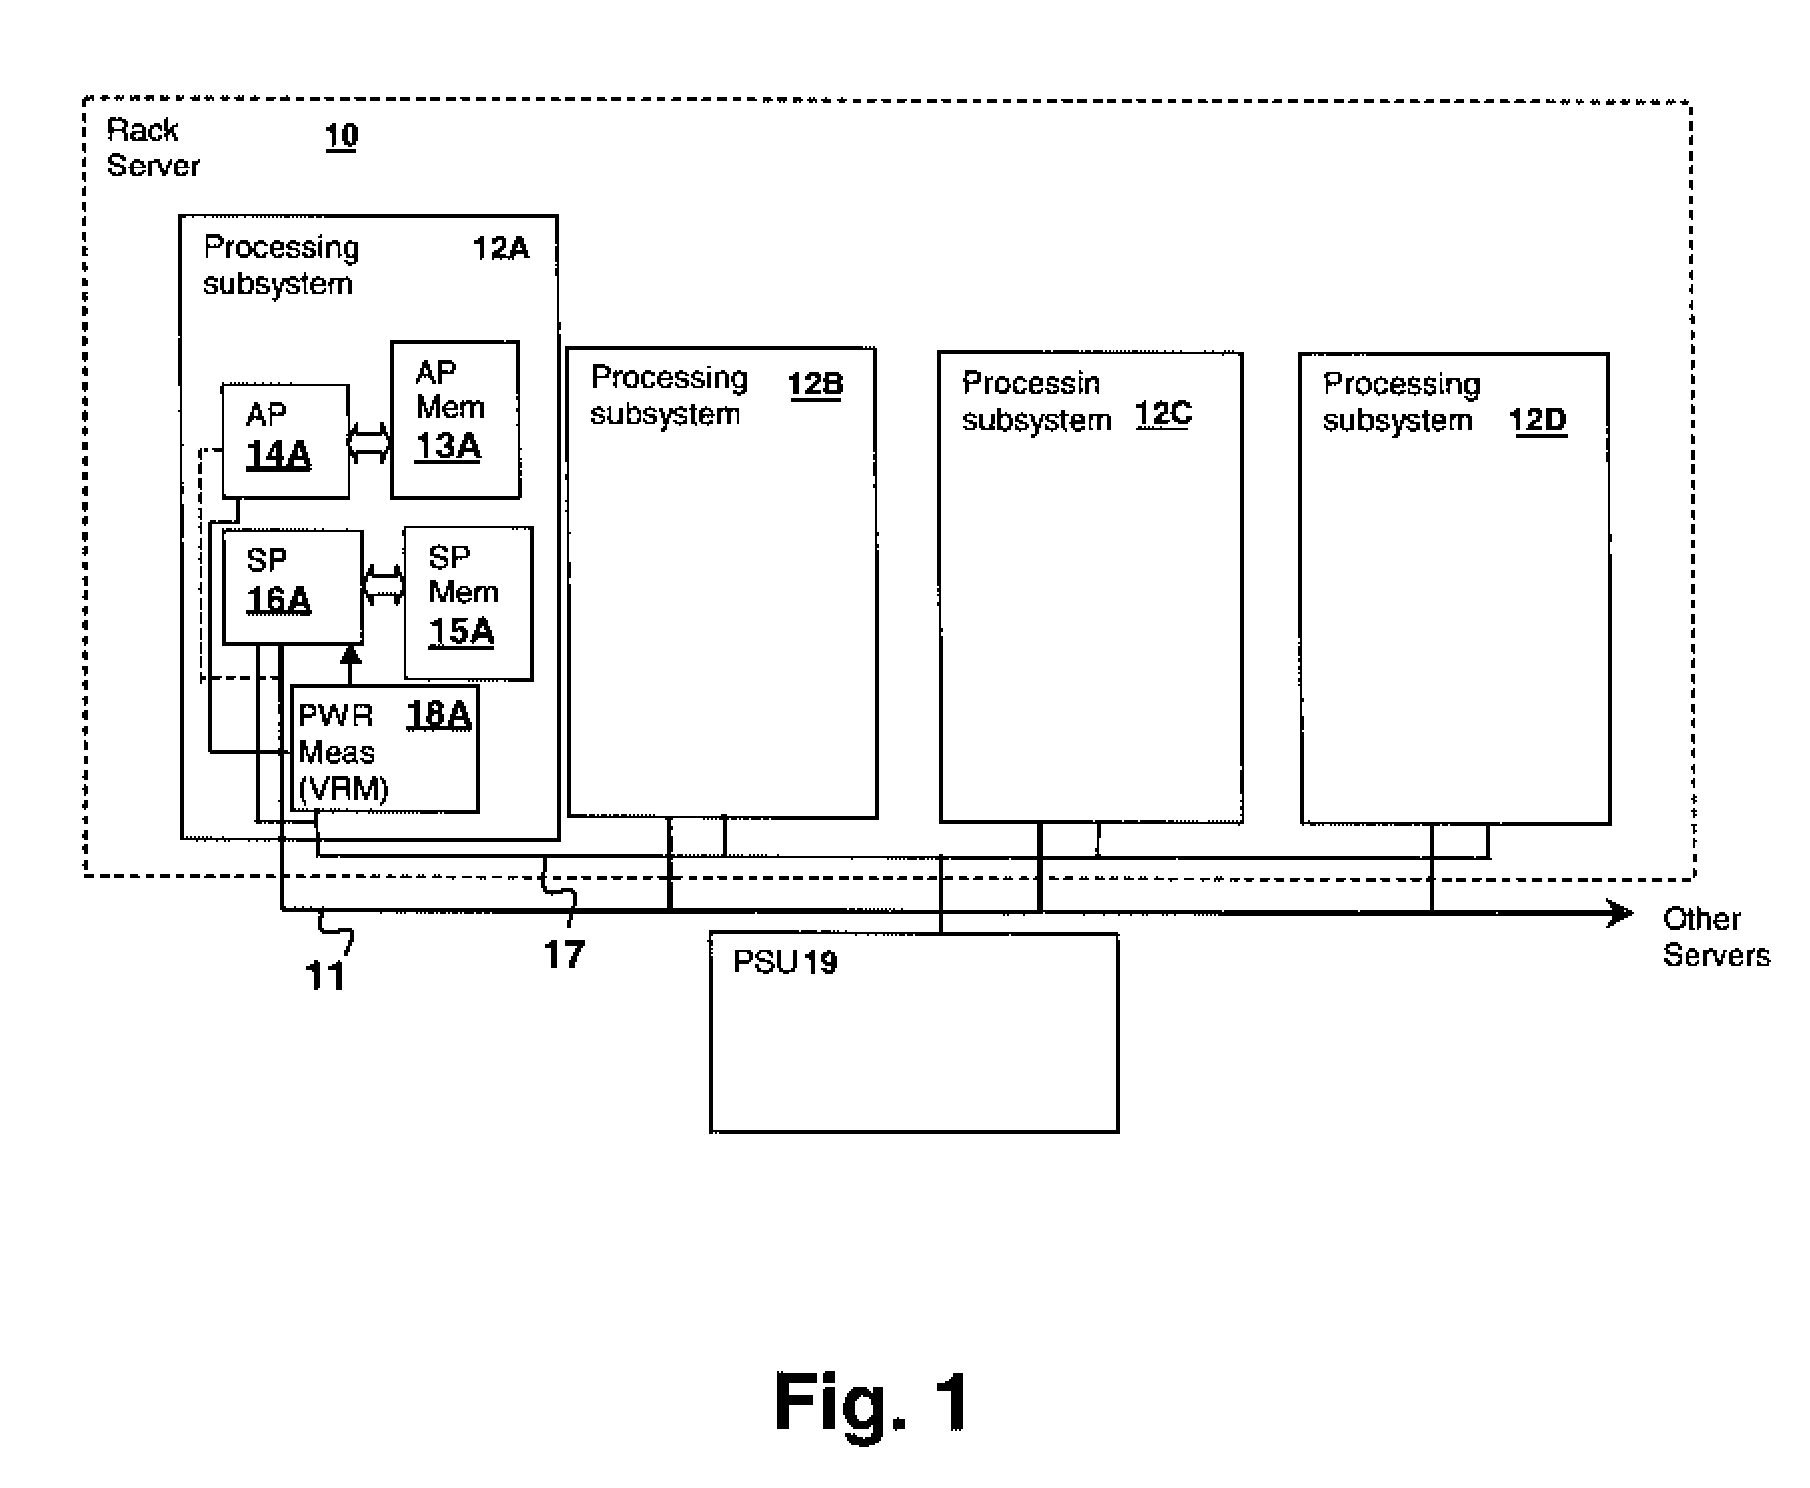 Method and System for Estimating Processor Utilization from Power Measurements